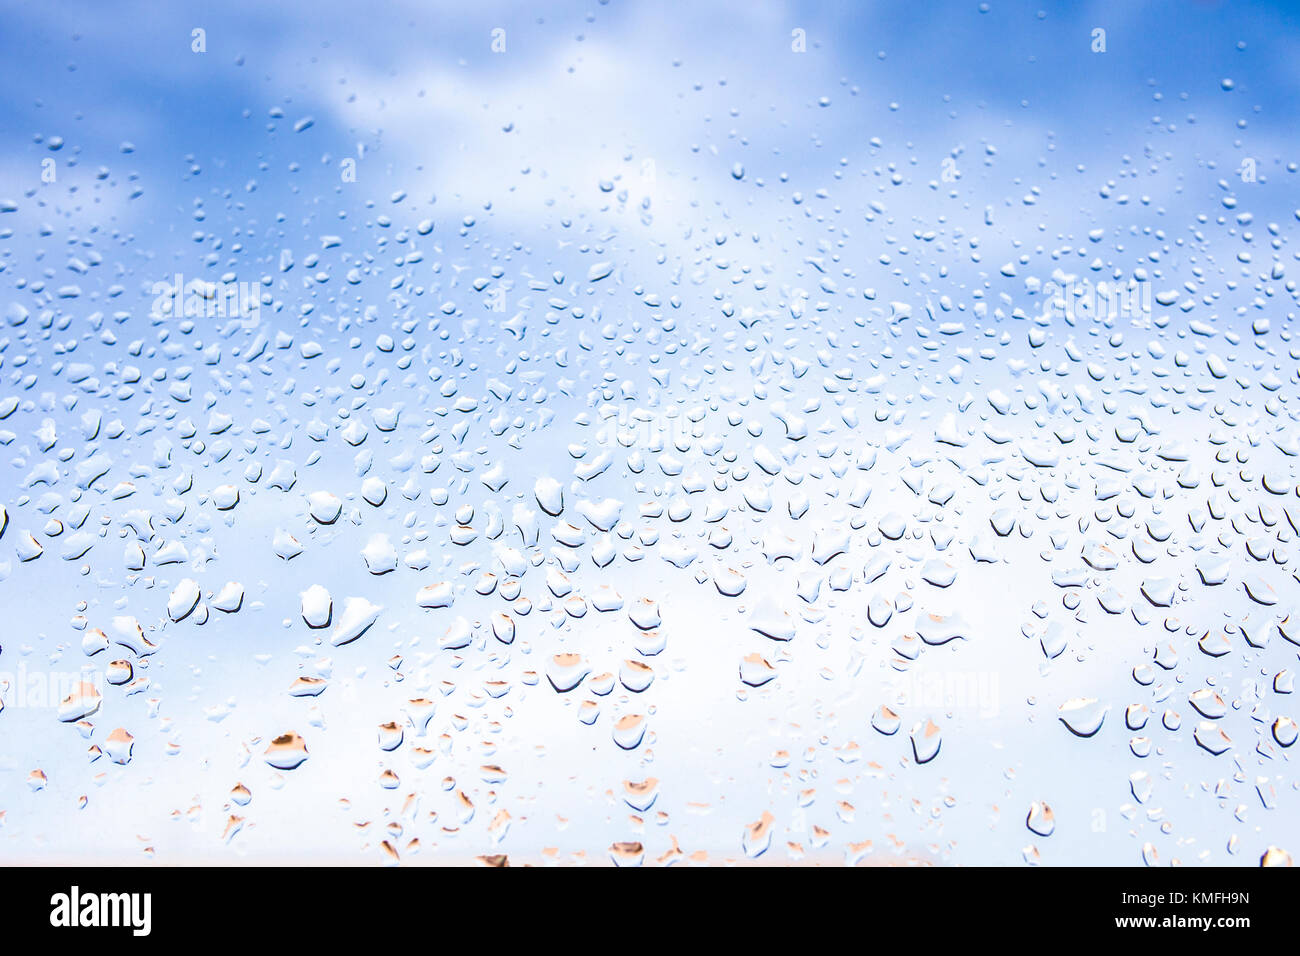 Rain drops on the glass in the background blurred blue cloudy sky. After raining concept Stock Photo